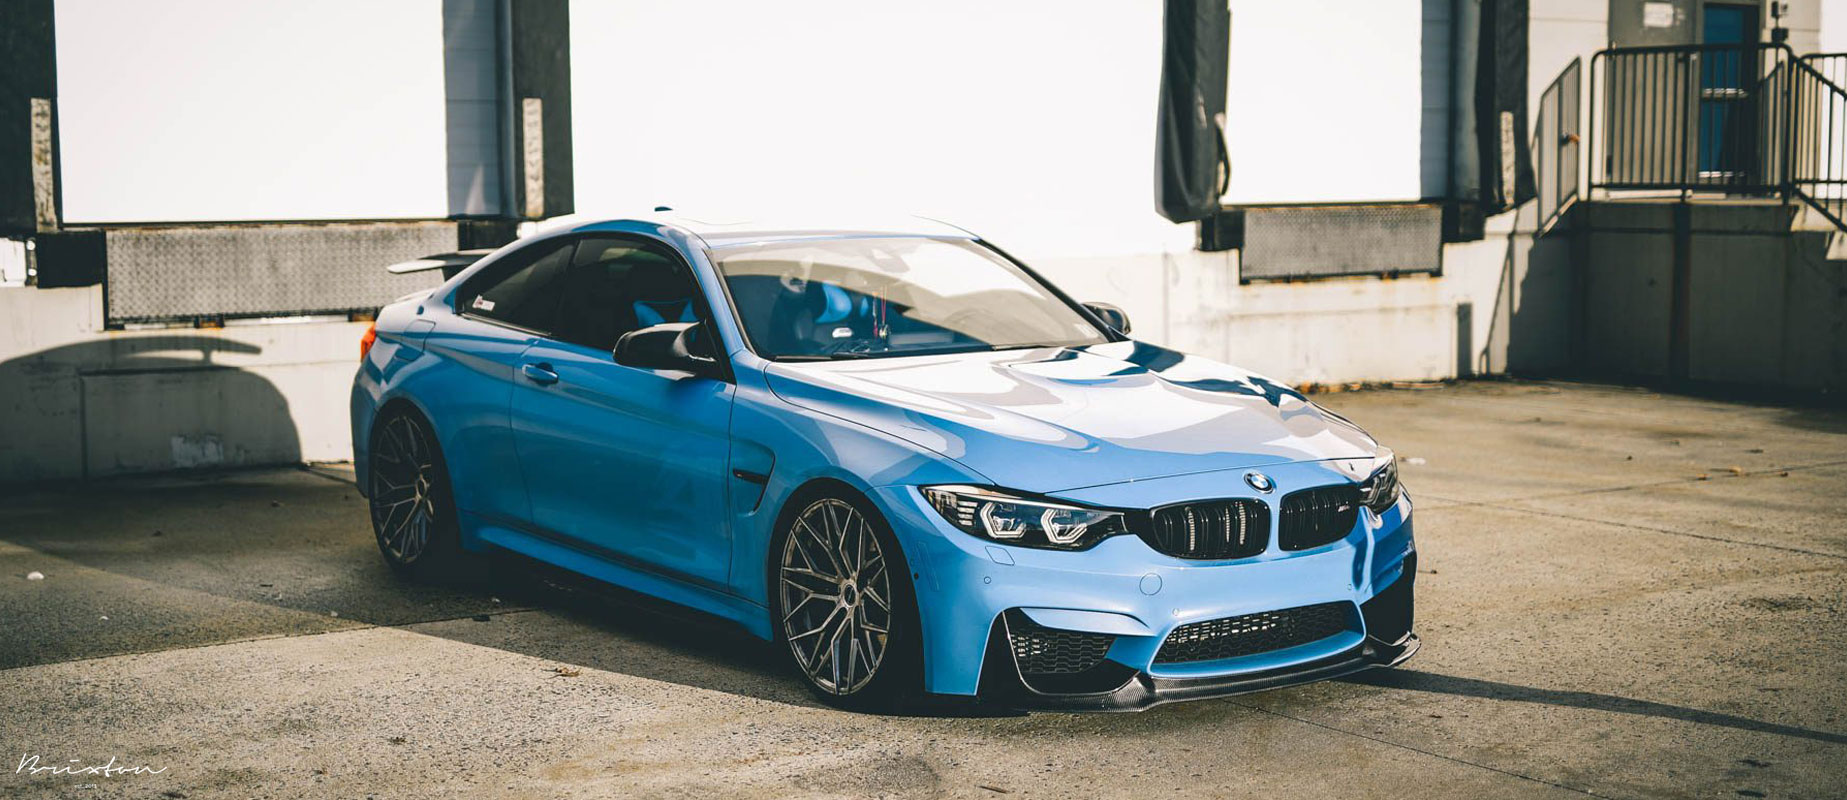 Yas Marina Blue Bmw F82 M4 Brixton Forged Cm10 Radial Forged Brushed Gloss Titanium Concave Wheels